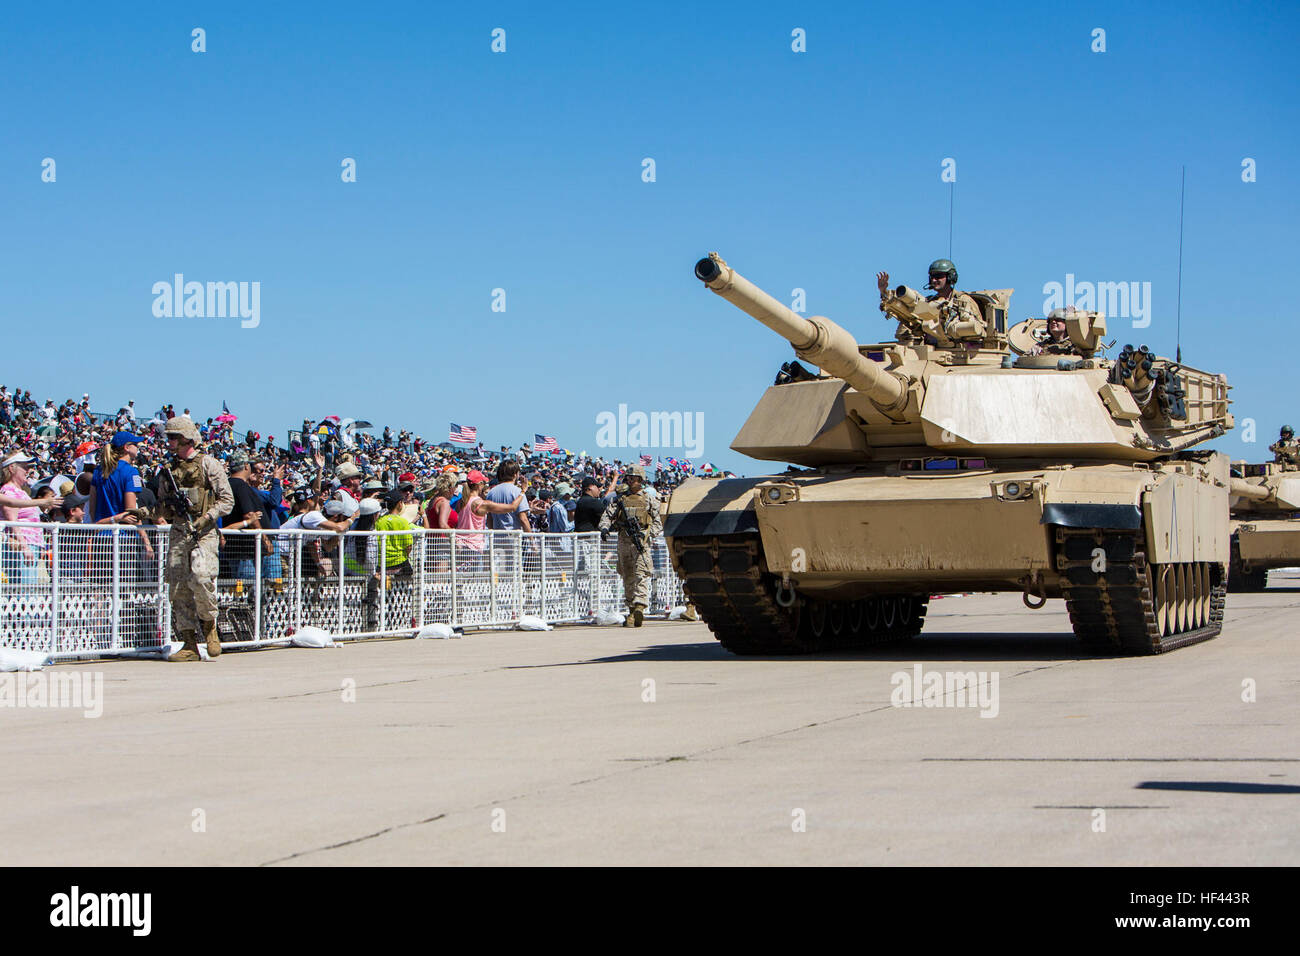 U.S. Marines with 1st Marine Expeditionary Force wave to the a crowd of onlookers while passing by aboard their M1 A2 Abrams tank as part of the Marine Air Ground Task Force (MAGTF) demonstration at the 2016 Marine Corps Air Station (MCAS) Miramar Air Show at MCAS Miramar, Calif., Sept. 24, 2016. The MCAS Miramar Air Show honors 100 years of the Marine Corps Reserves by showcasing aerial prowess of the Armed Forces and their appreciation of the civilian community’s support to the troops. (U.S. Marine Corps photo By Corporal Jessica Y. Lucio/Released) MCAS Miramar Air Show 160924-M-UX416-033 Stock Photo